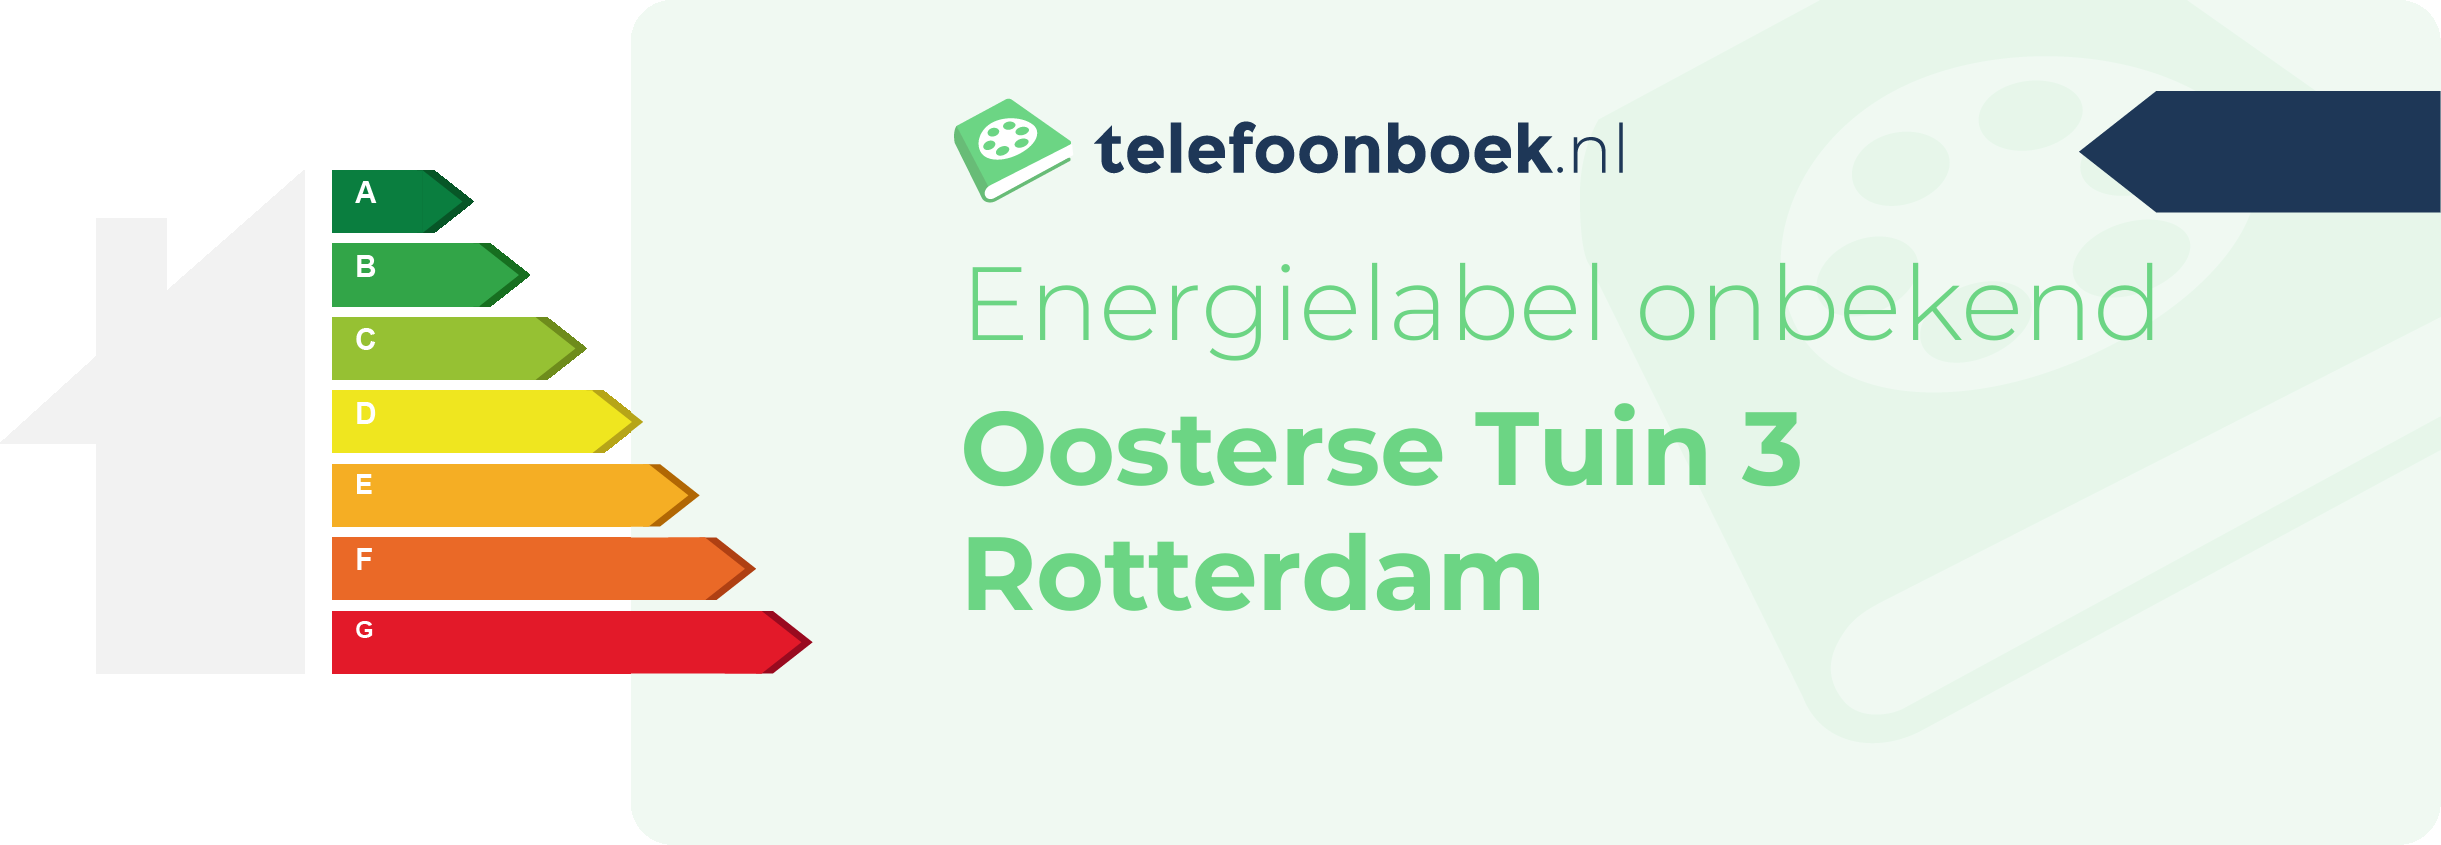 Energielabel Oosterse Tuin 3 Rotterdam